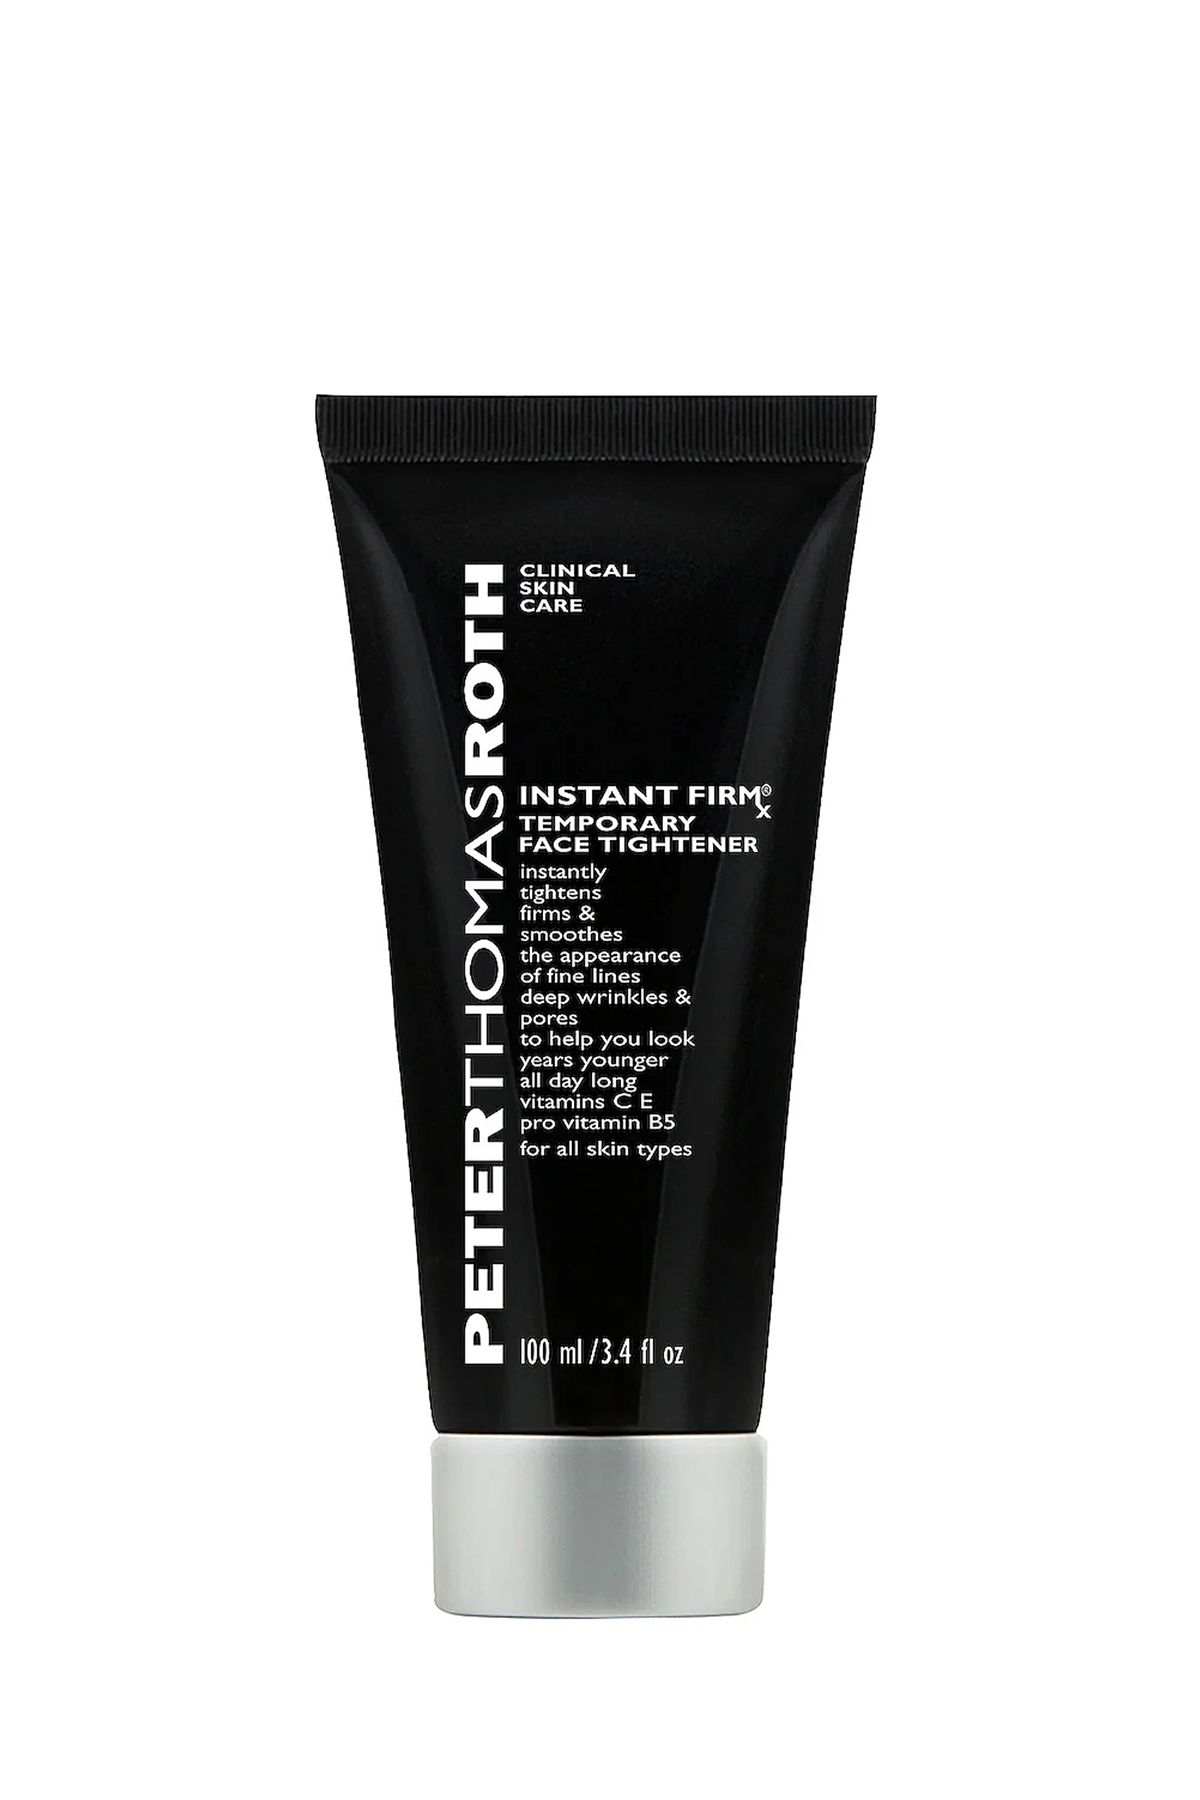 PETER THOMAS ROTH Instant Firmx Temporary Face Tightener 100ml